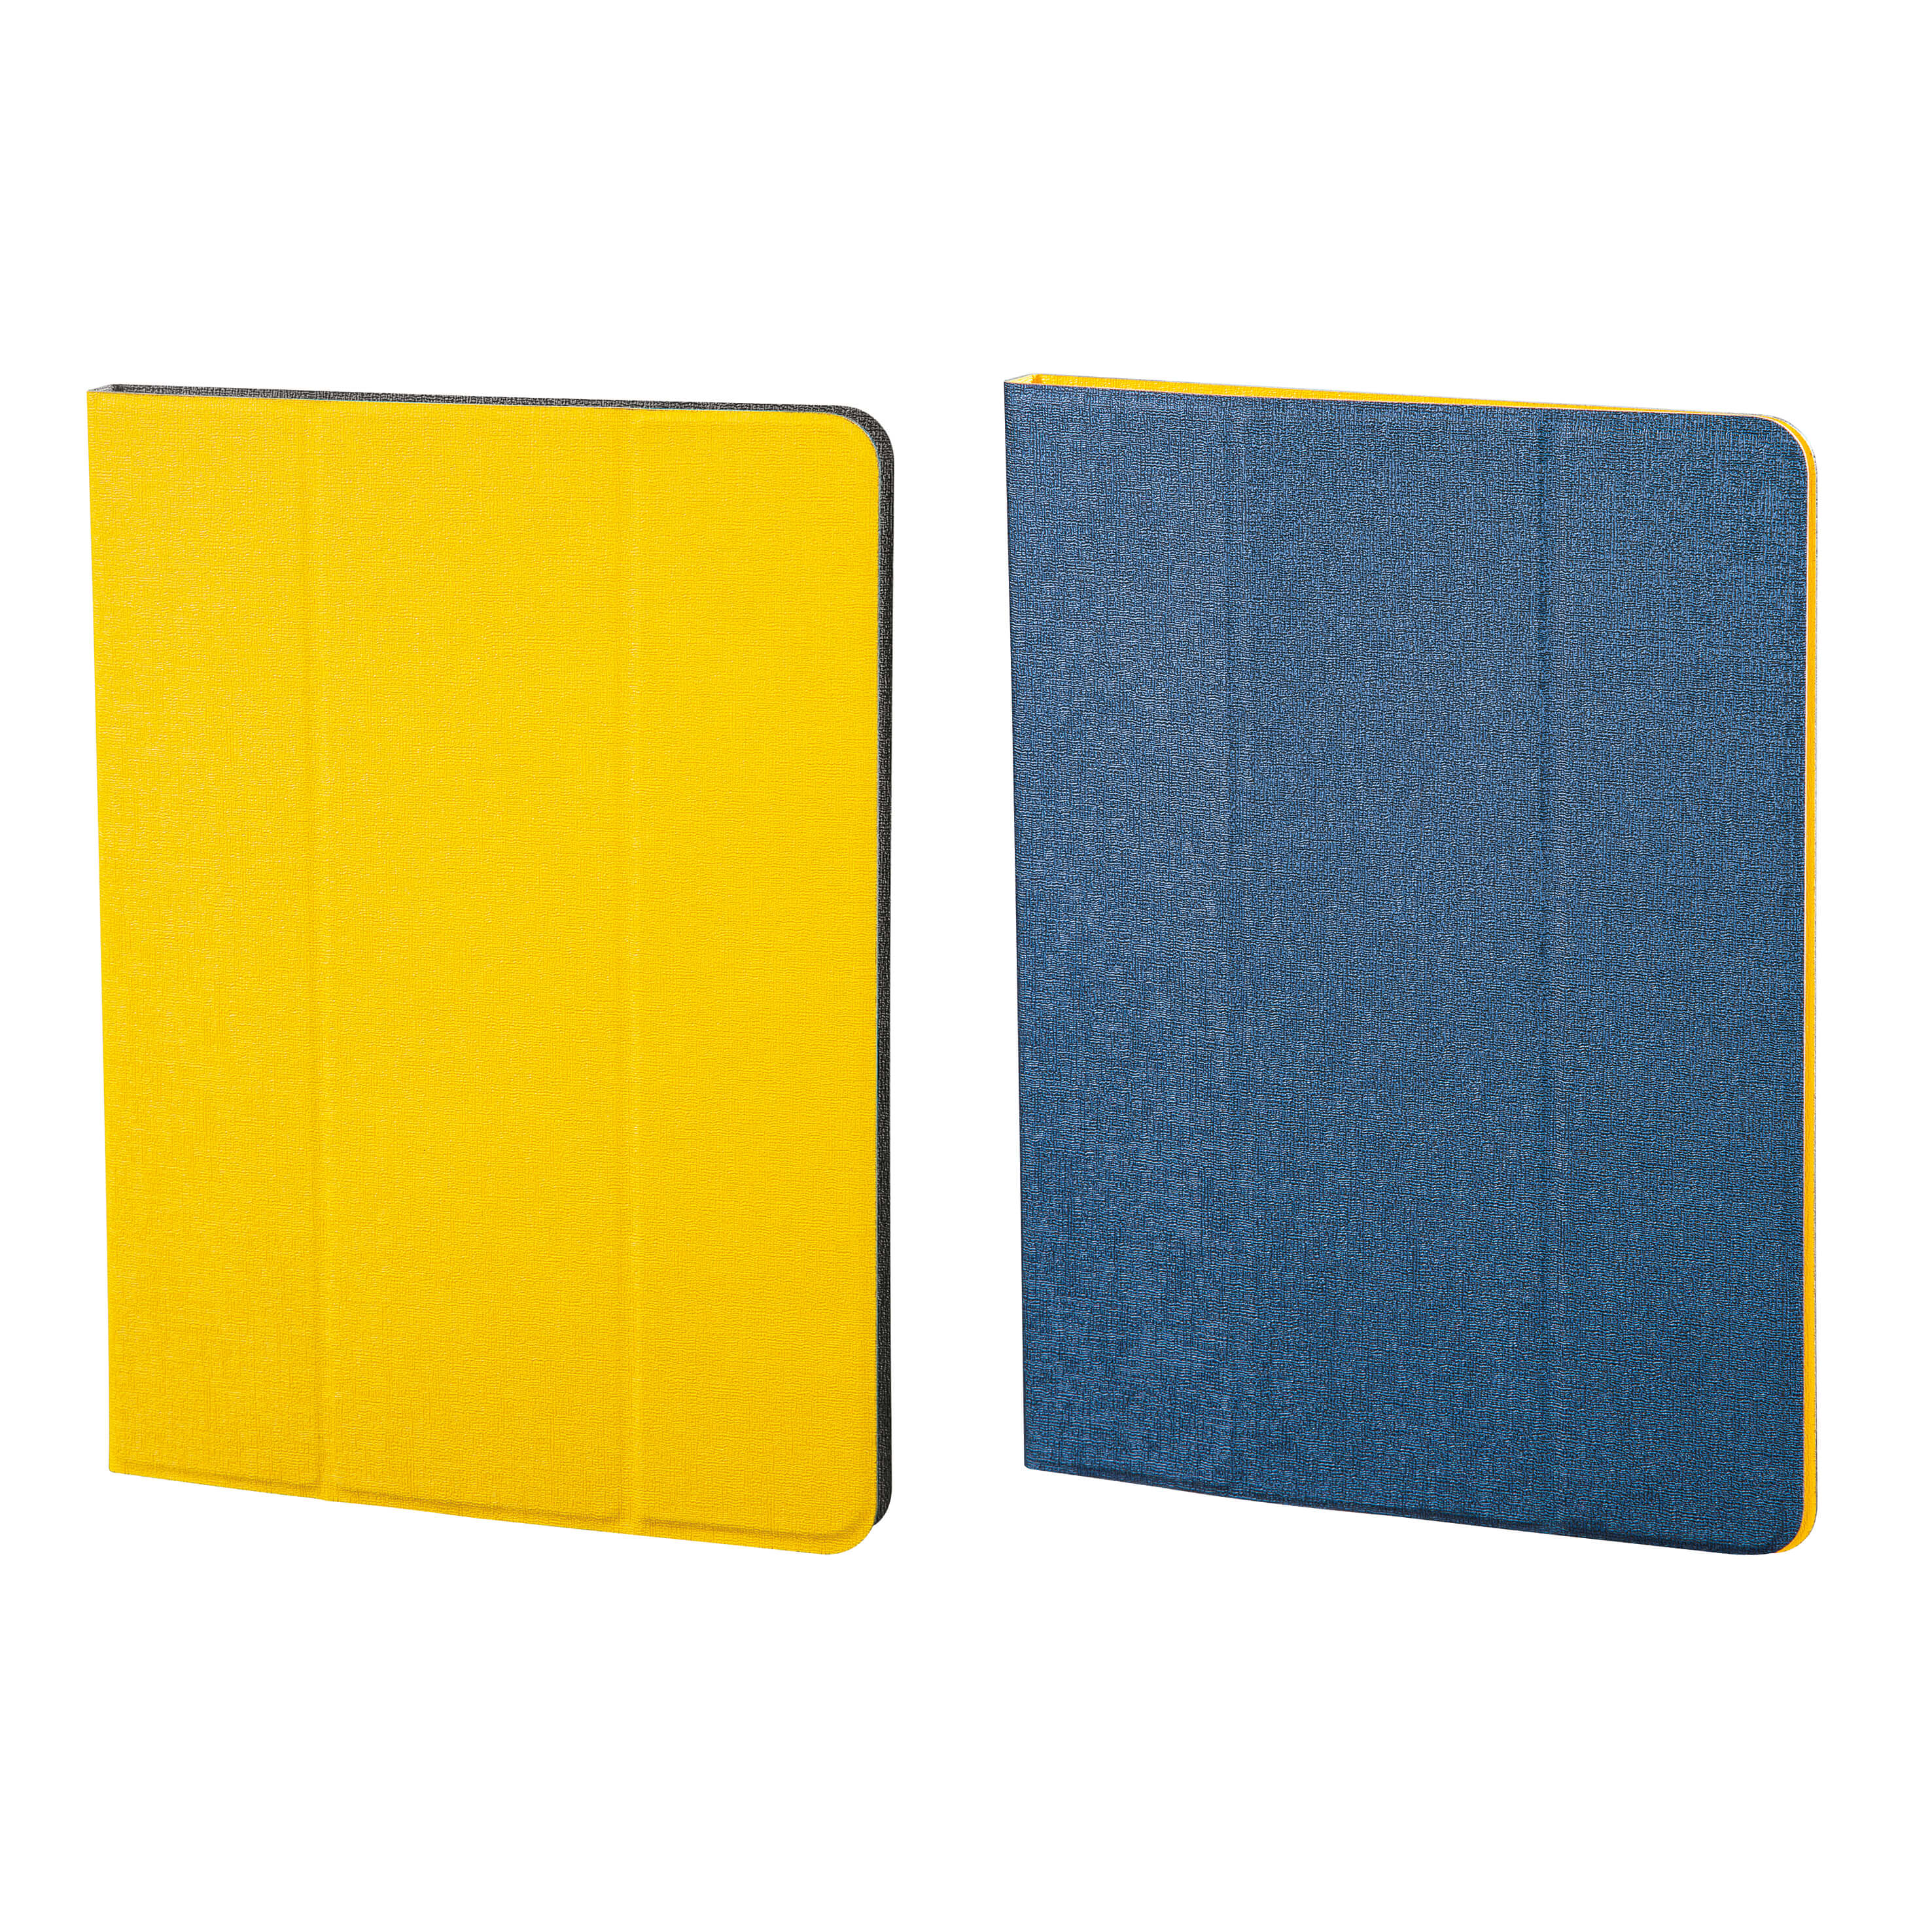 TwoTone Portfolio for all tab lets up to 17.8 cm (7), blue/y